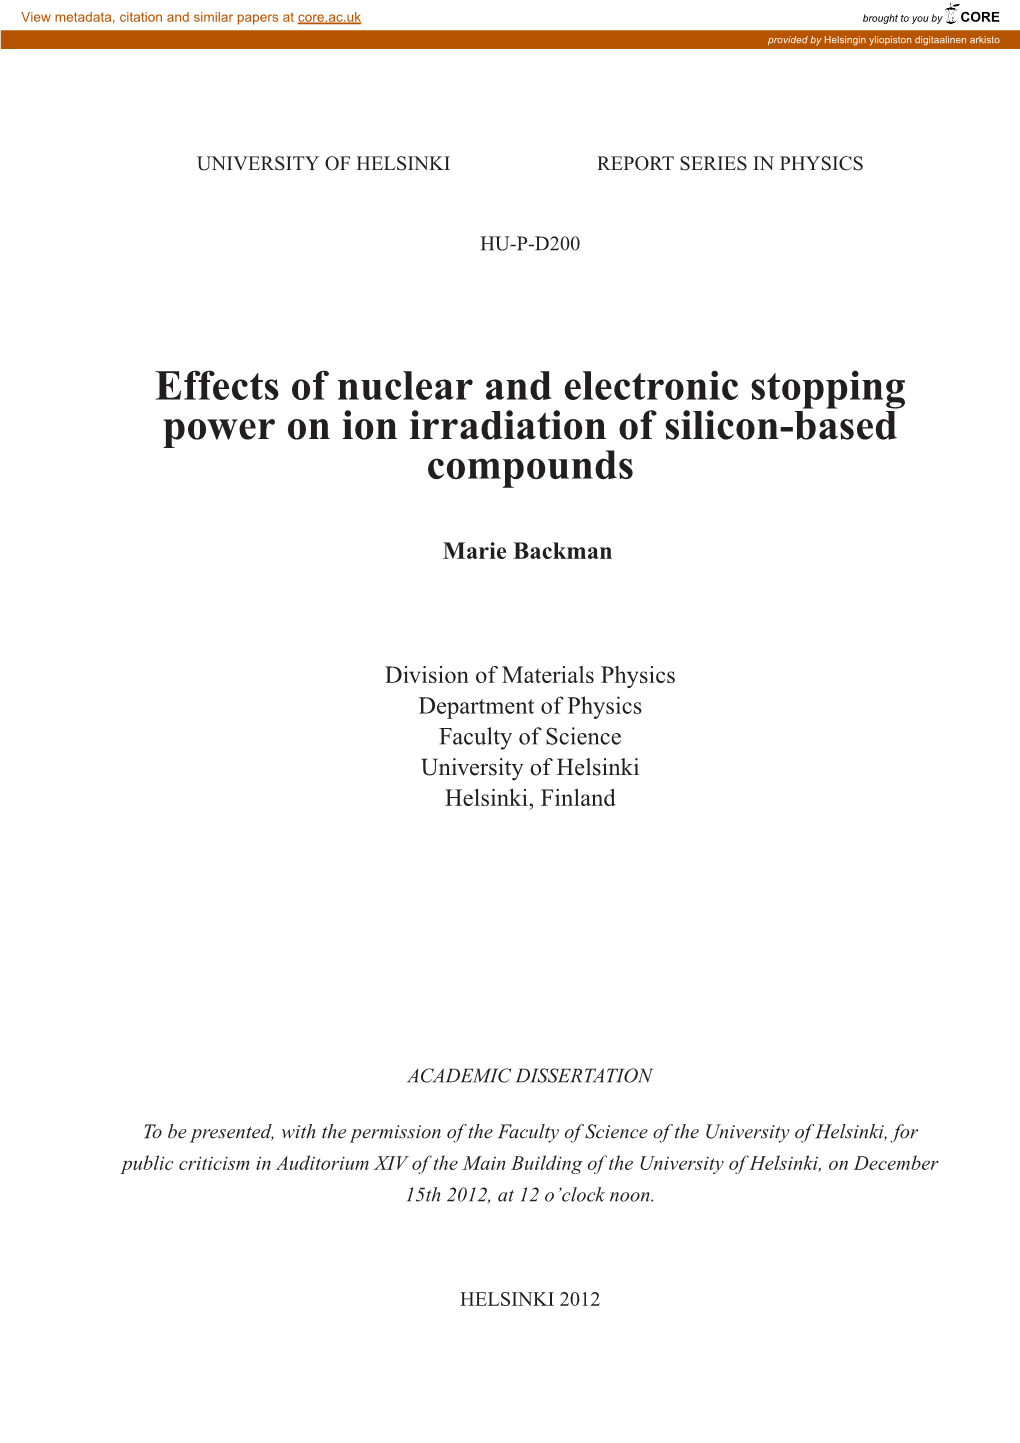 Effects of Nuclear and Electronic Stopping Power on Ion Irradiation of Silicon-Based Compounds